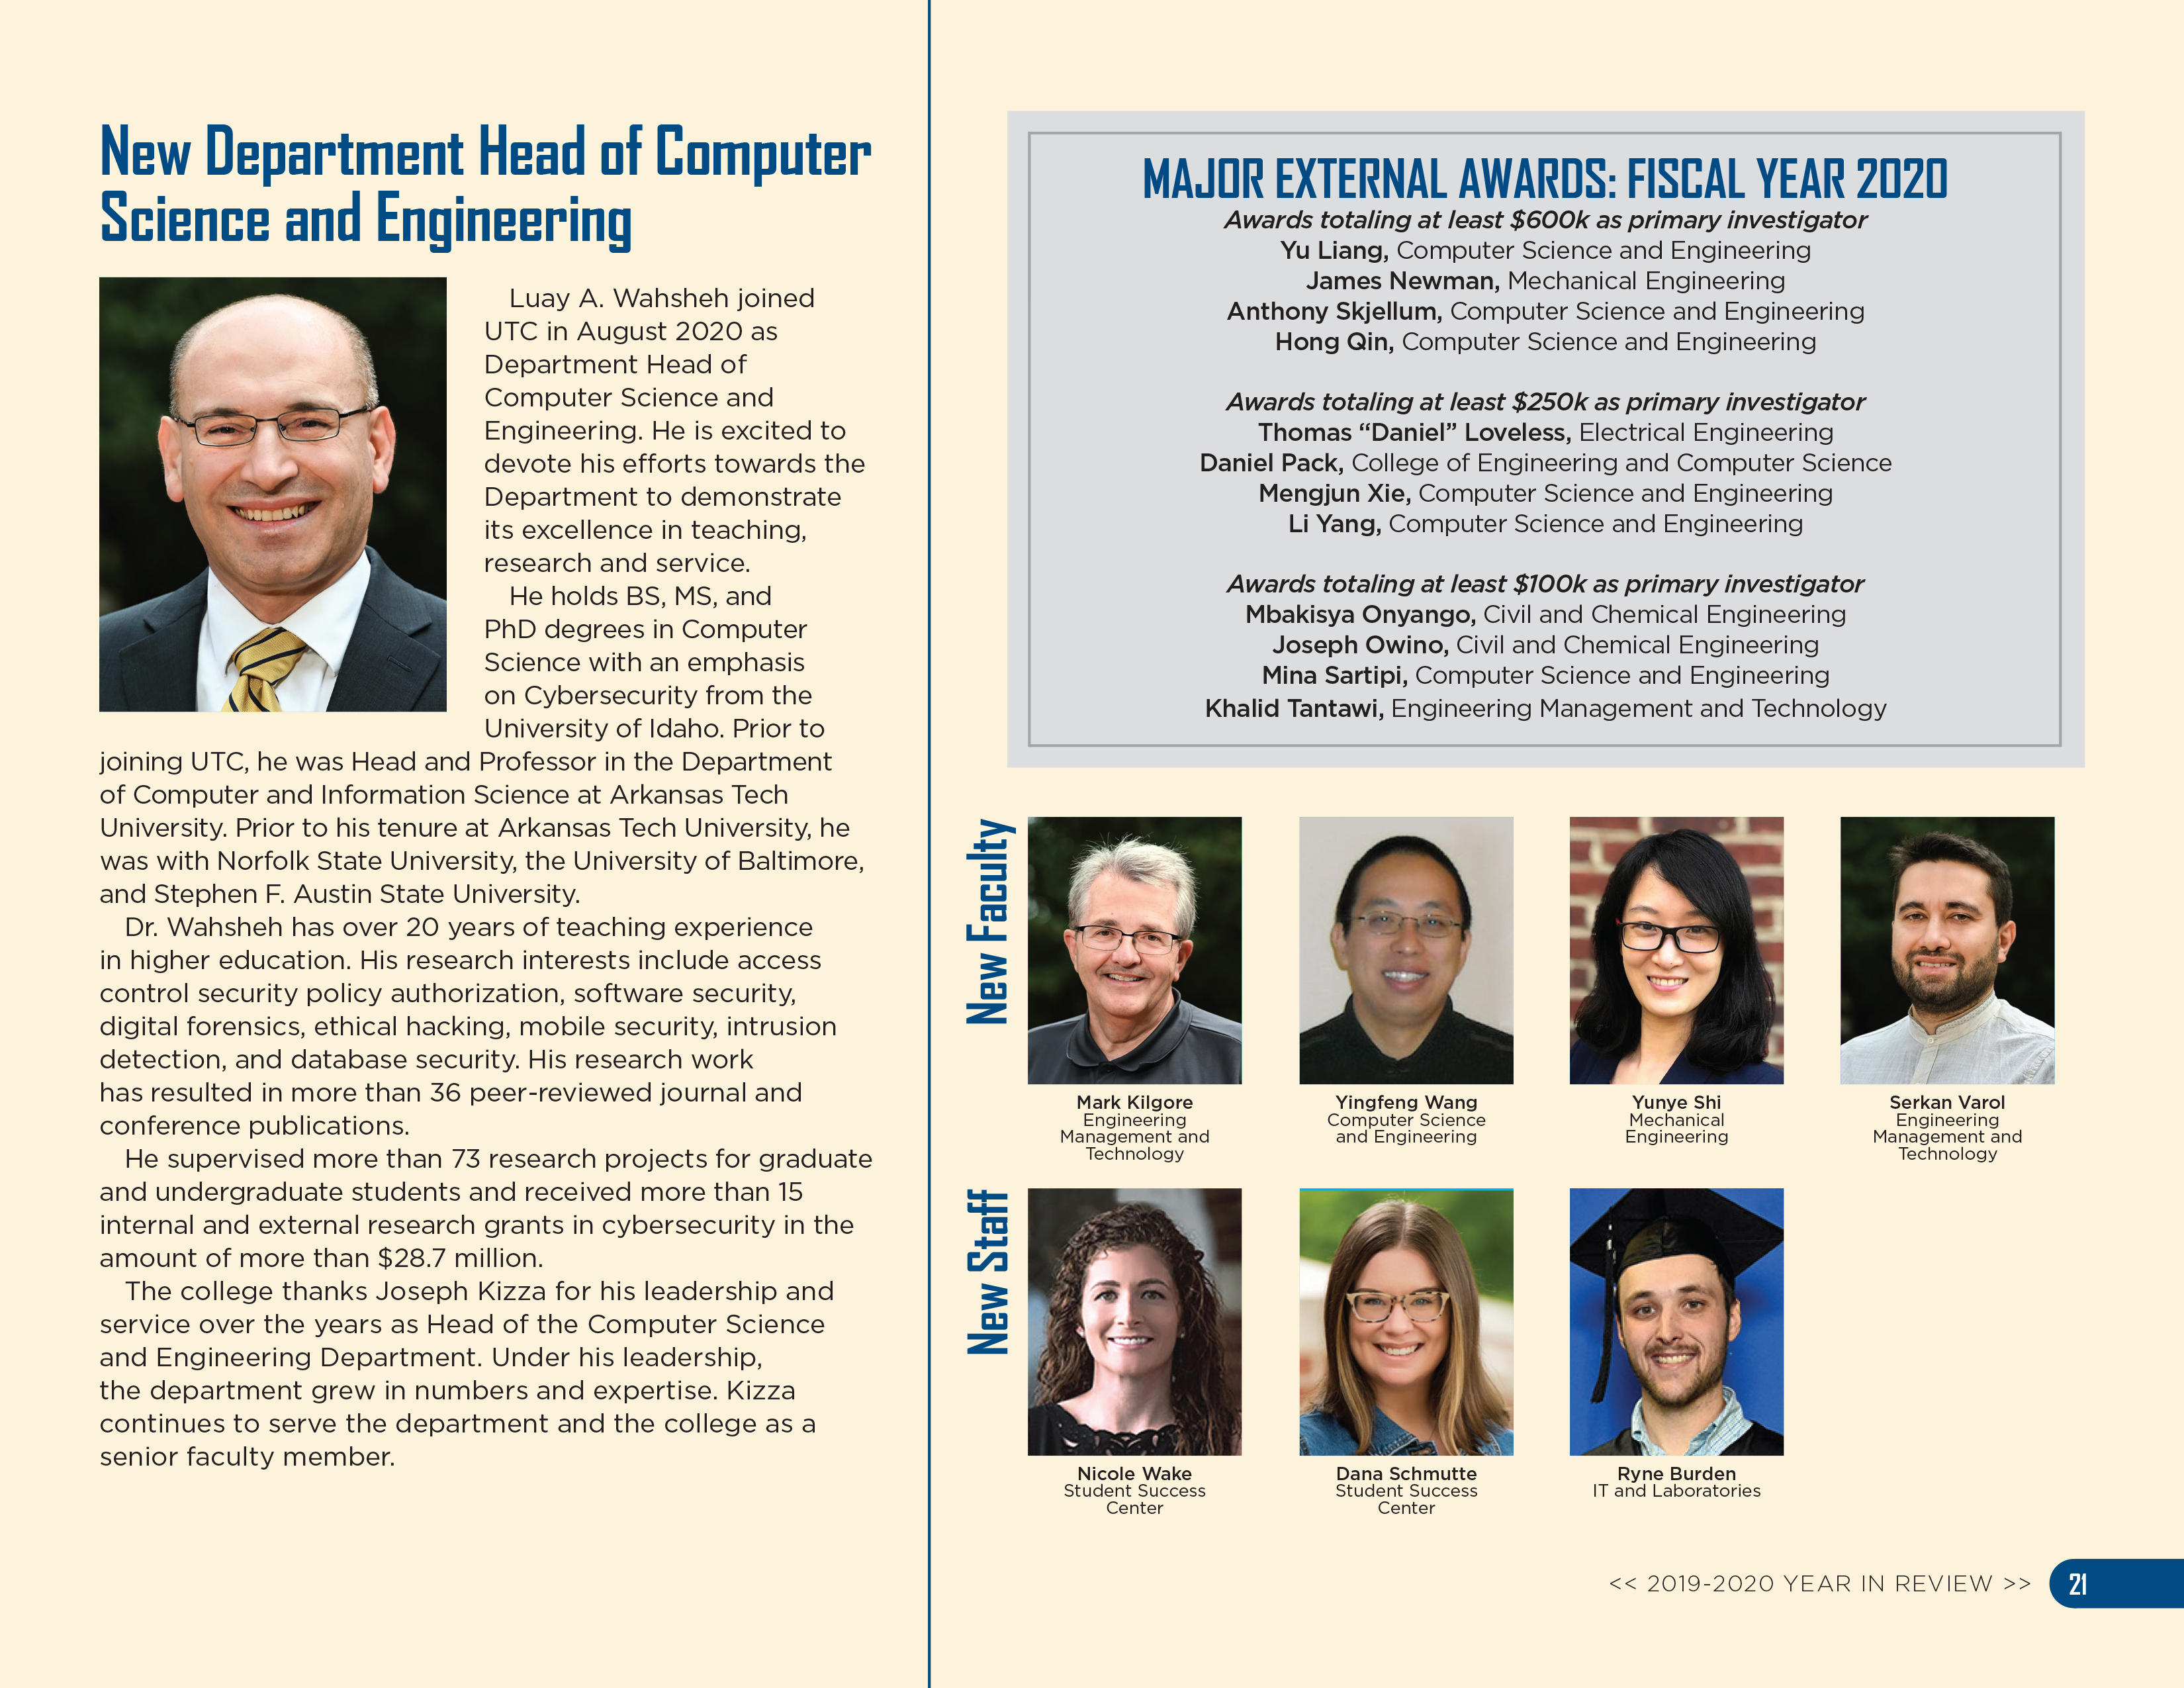 College of Engineering and Computer Science Annual Review; text equivalent available at https://new.utc.edu/engineering-and-computer-science/about/annual-reviews